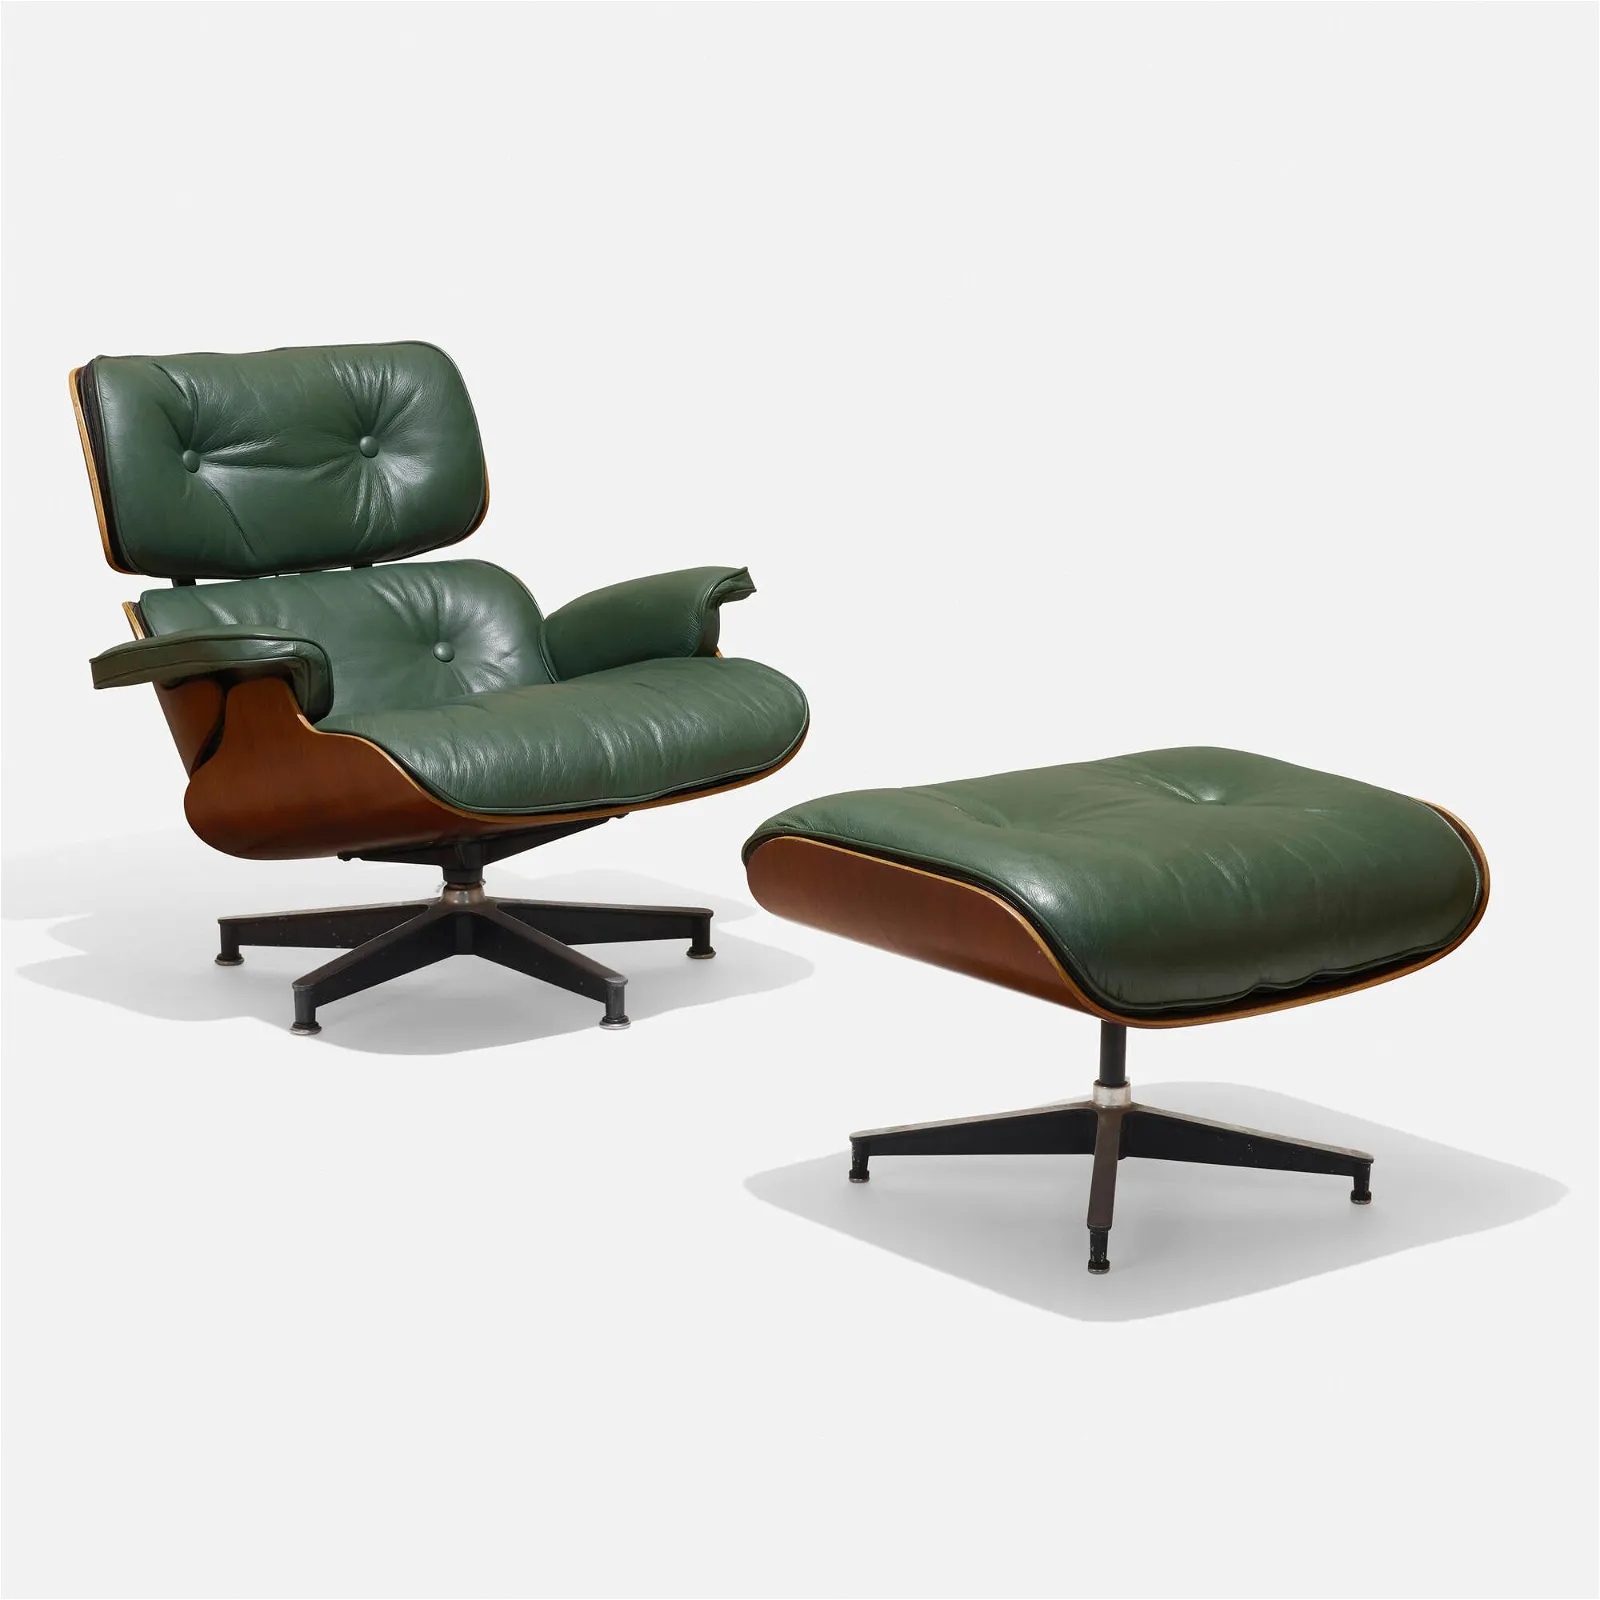 Bespoke green leather Eames lounge chair and ottoman tops Wright&#8217;s American Design sale